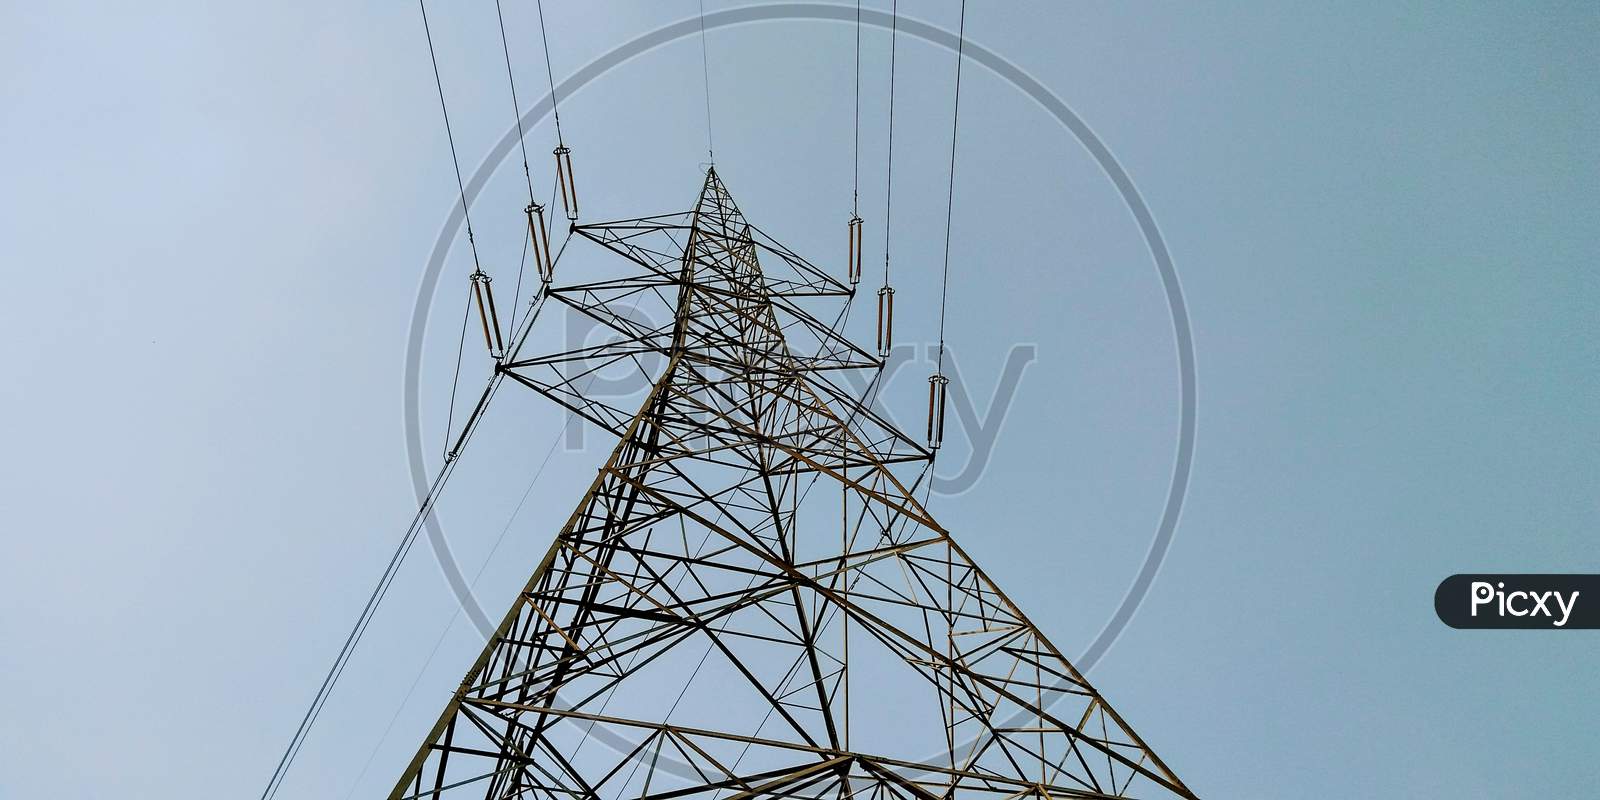 A View of Electric High tension Pole Over Sky